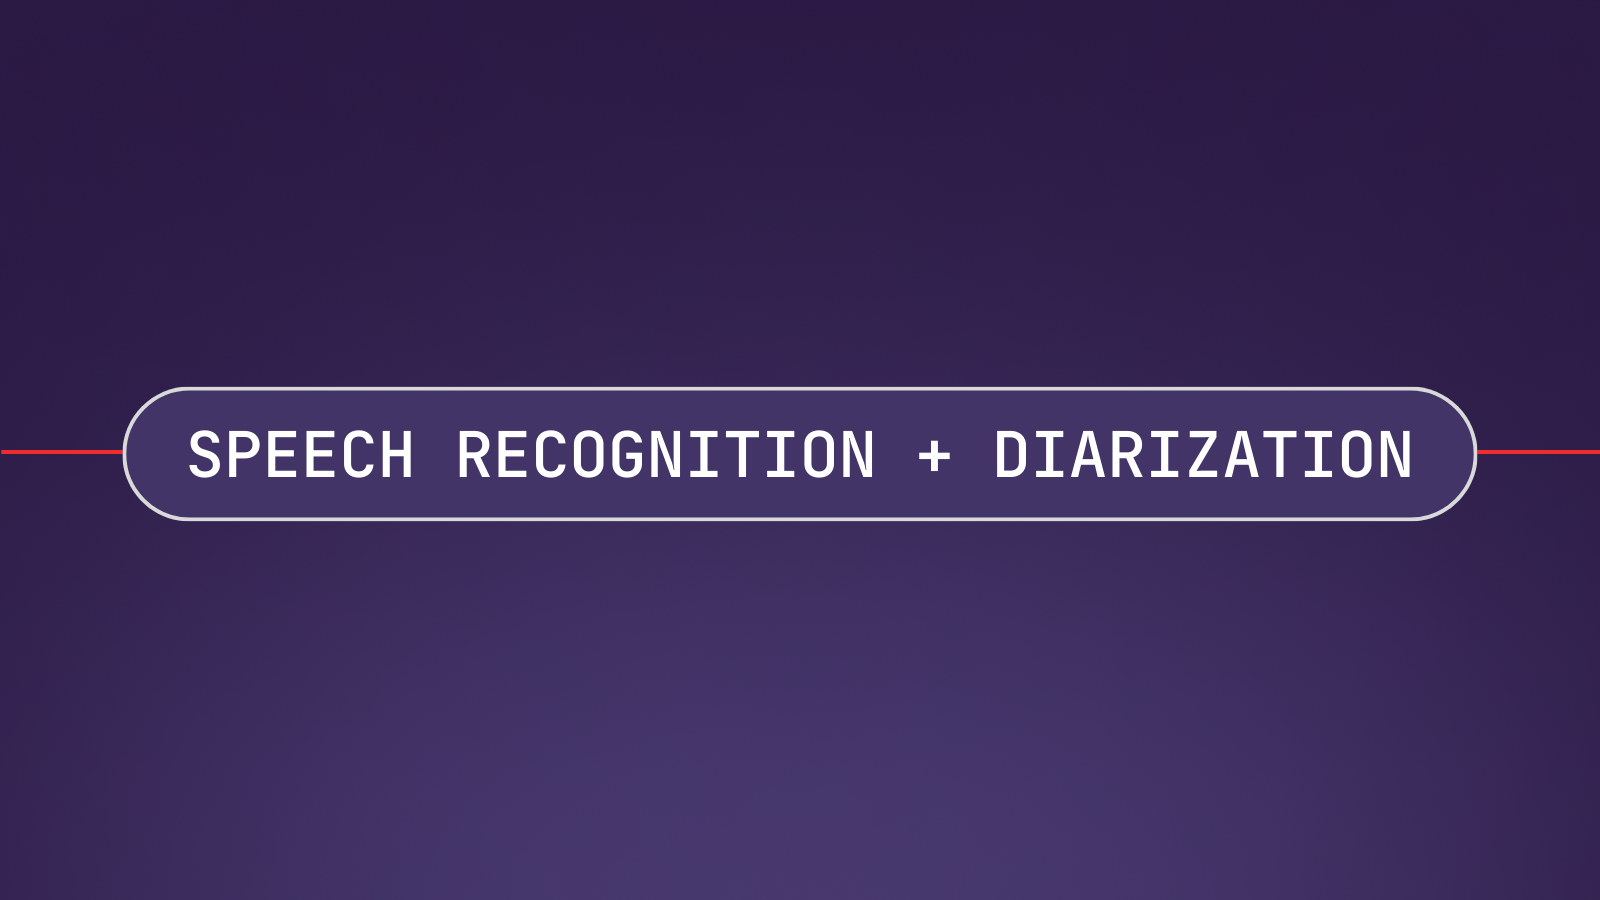 Combining Speech Recognition and Diarization in one model